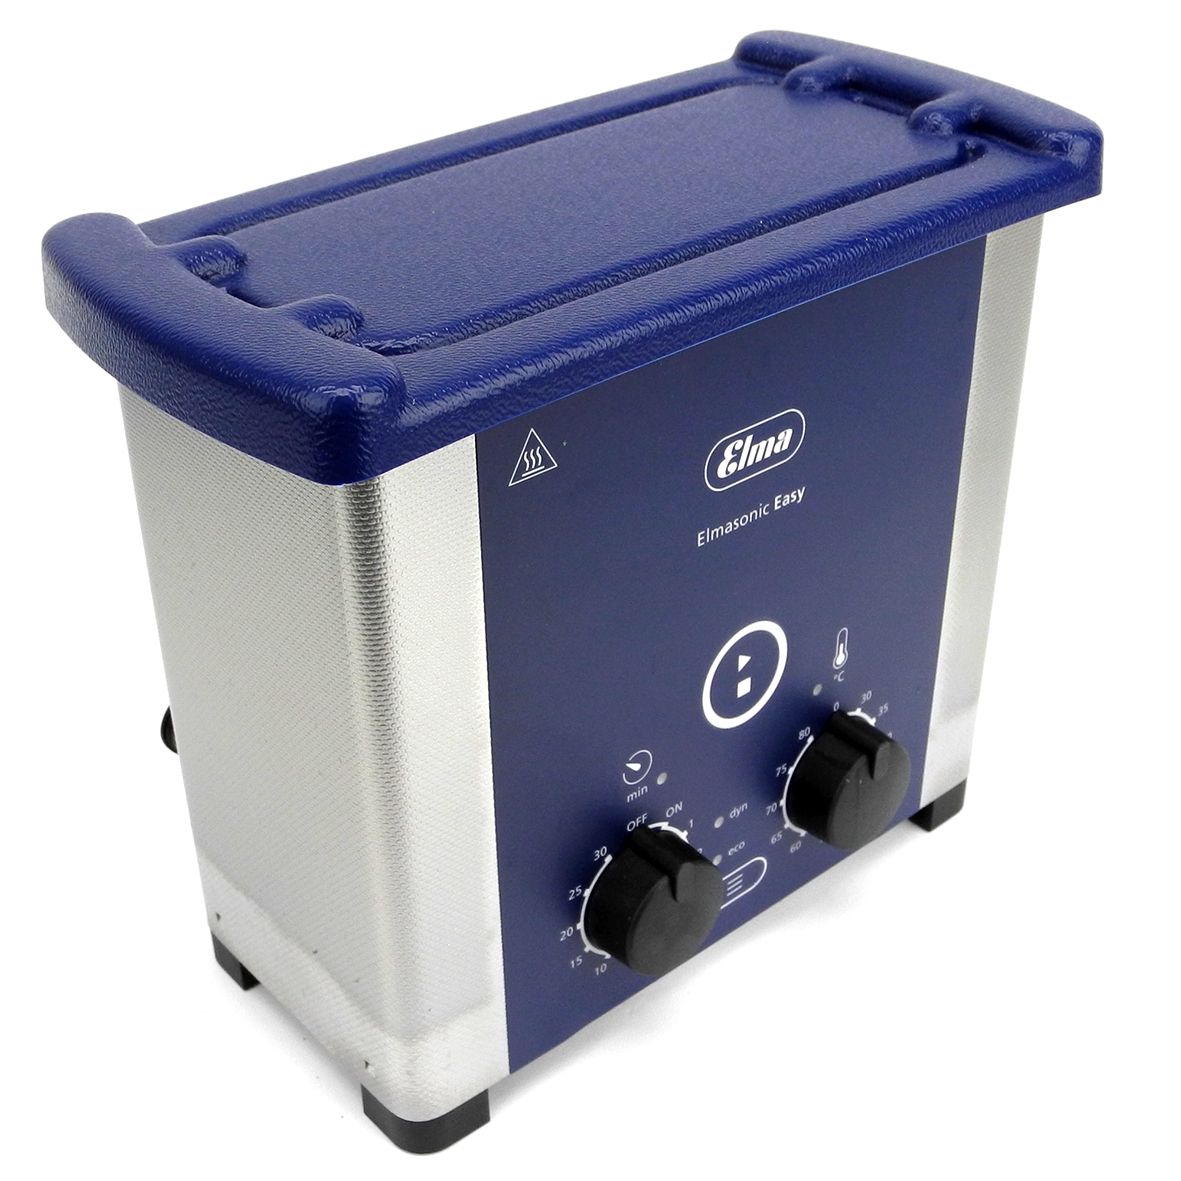 Ultrasonic Cleaning Machine 5.75 Litre Heated Tank With Lid Elma